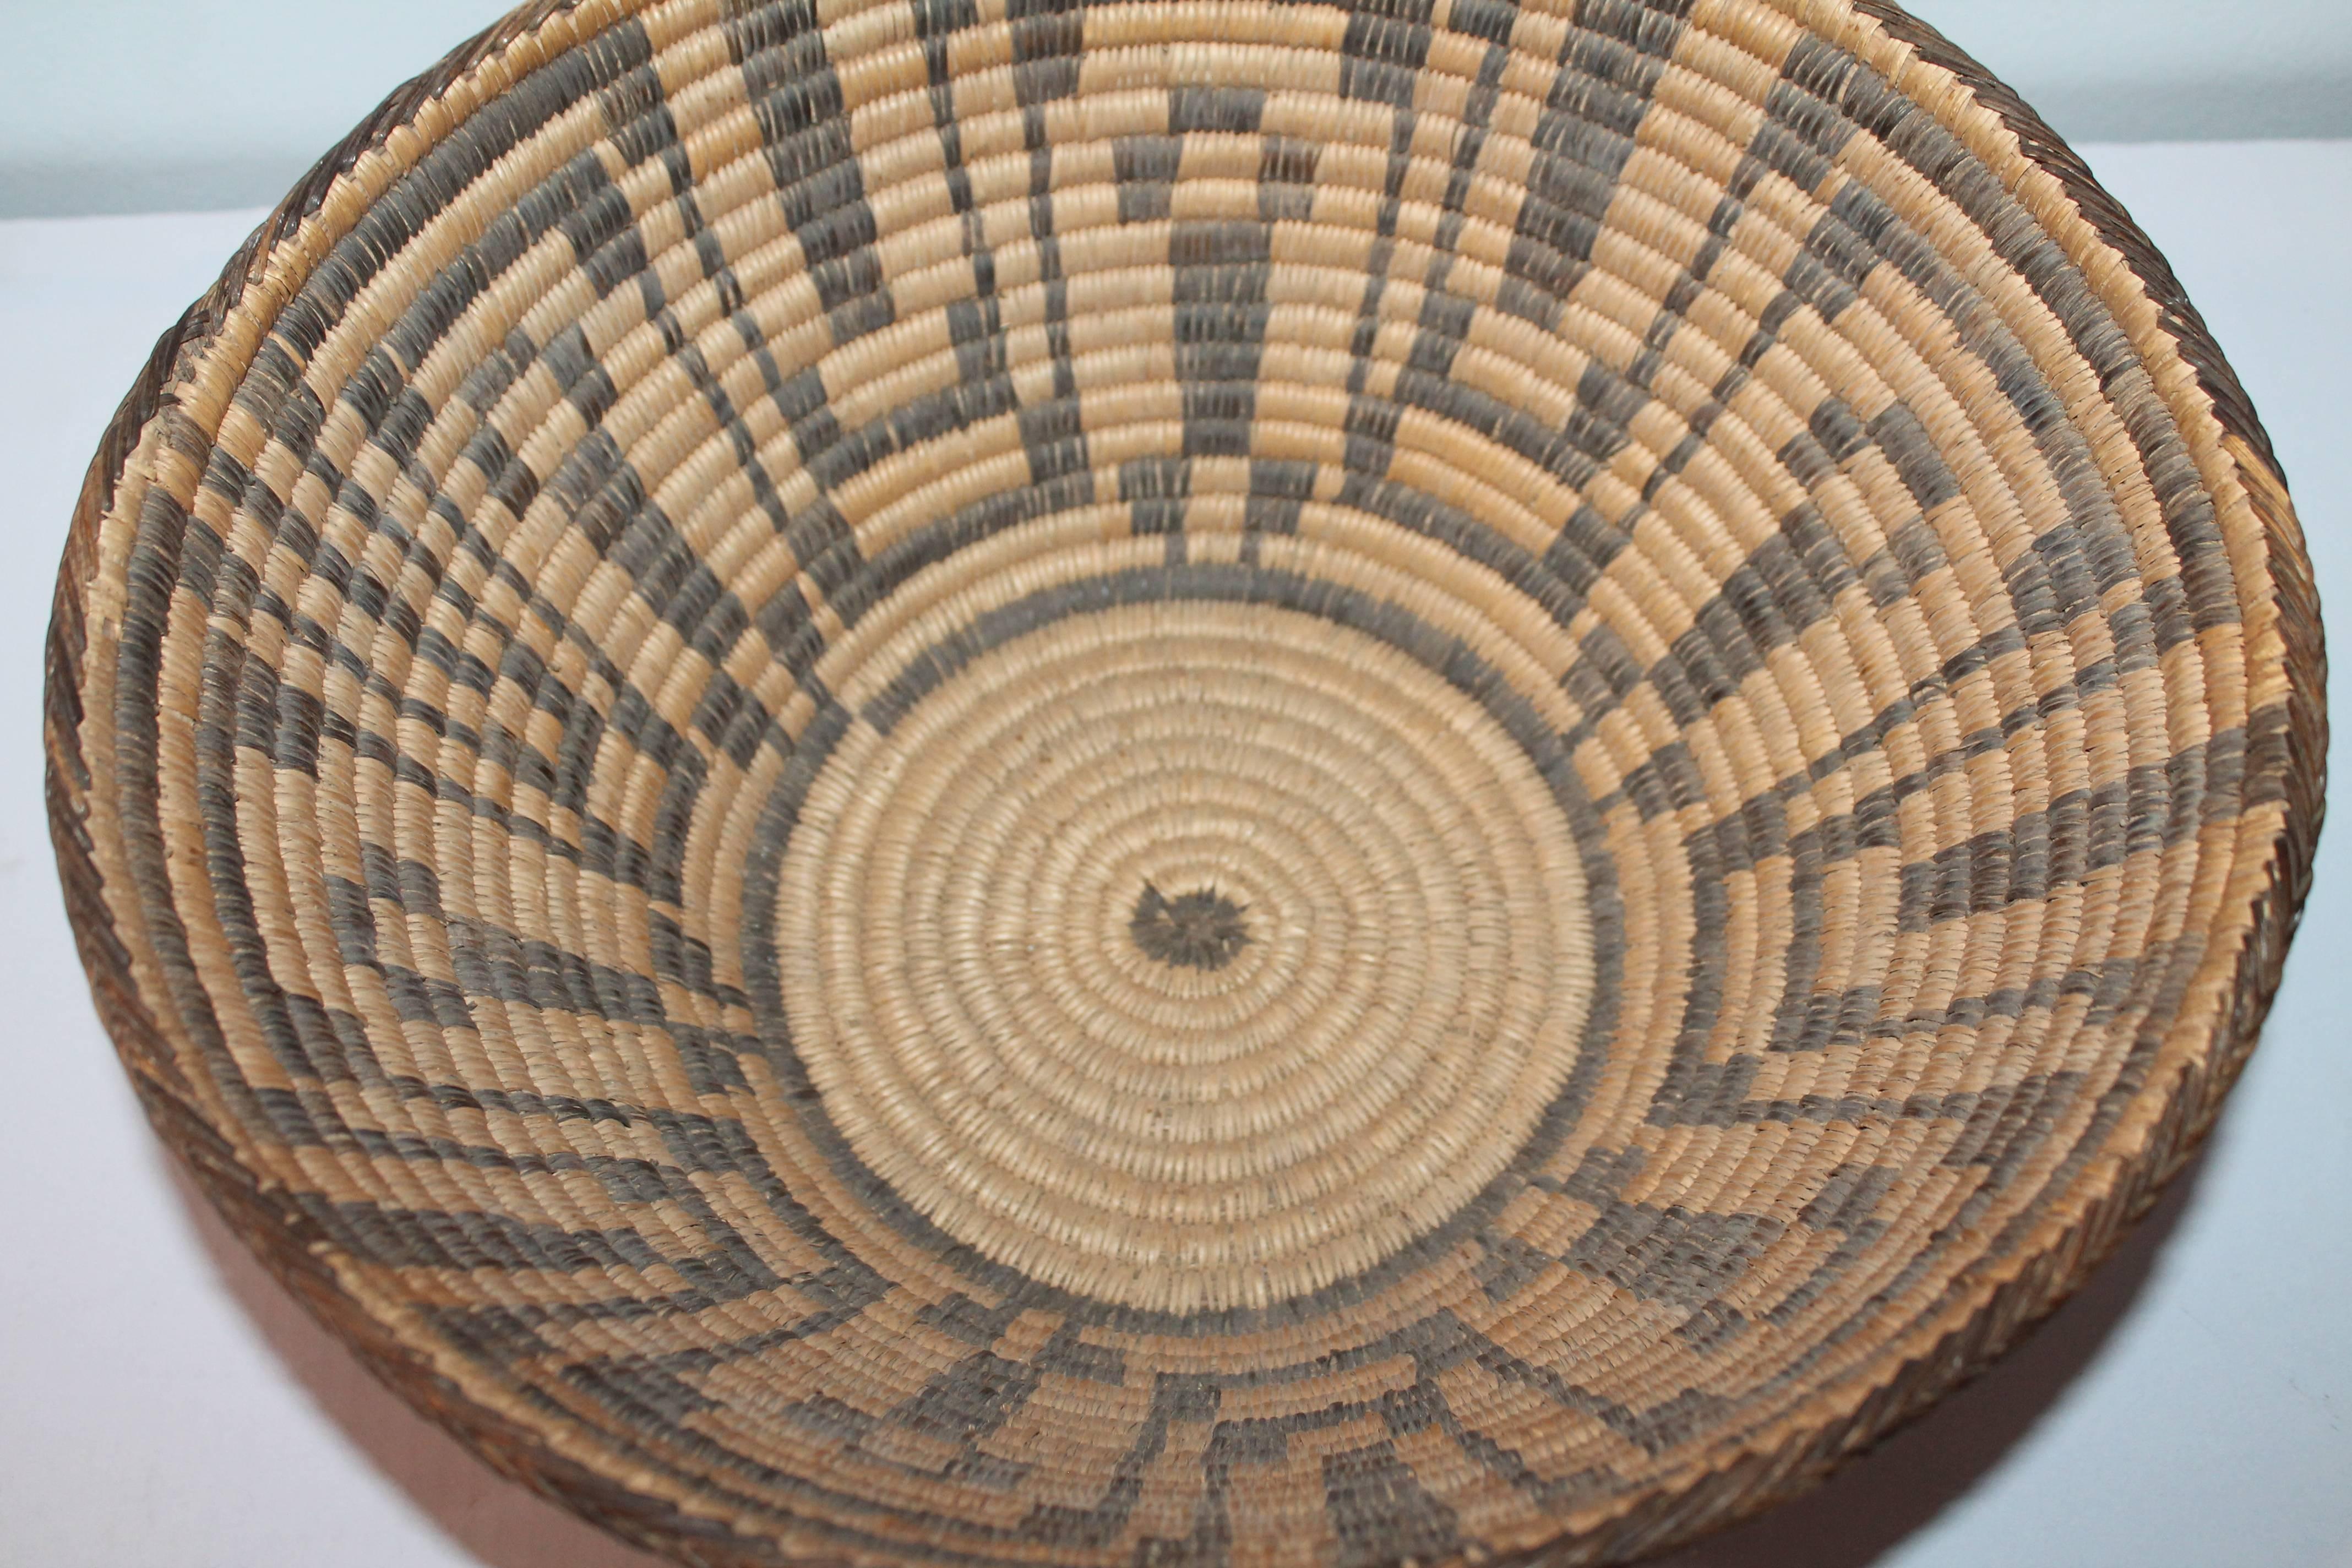 This large 19th century geometric Pima Indian basket is in fine condition and is quite large in size. A great addition to any Indian basket or American Indian collection. The man in the maze pattern.